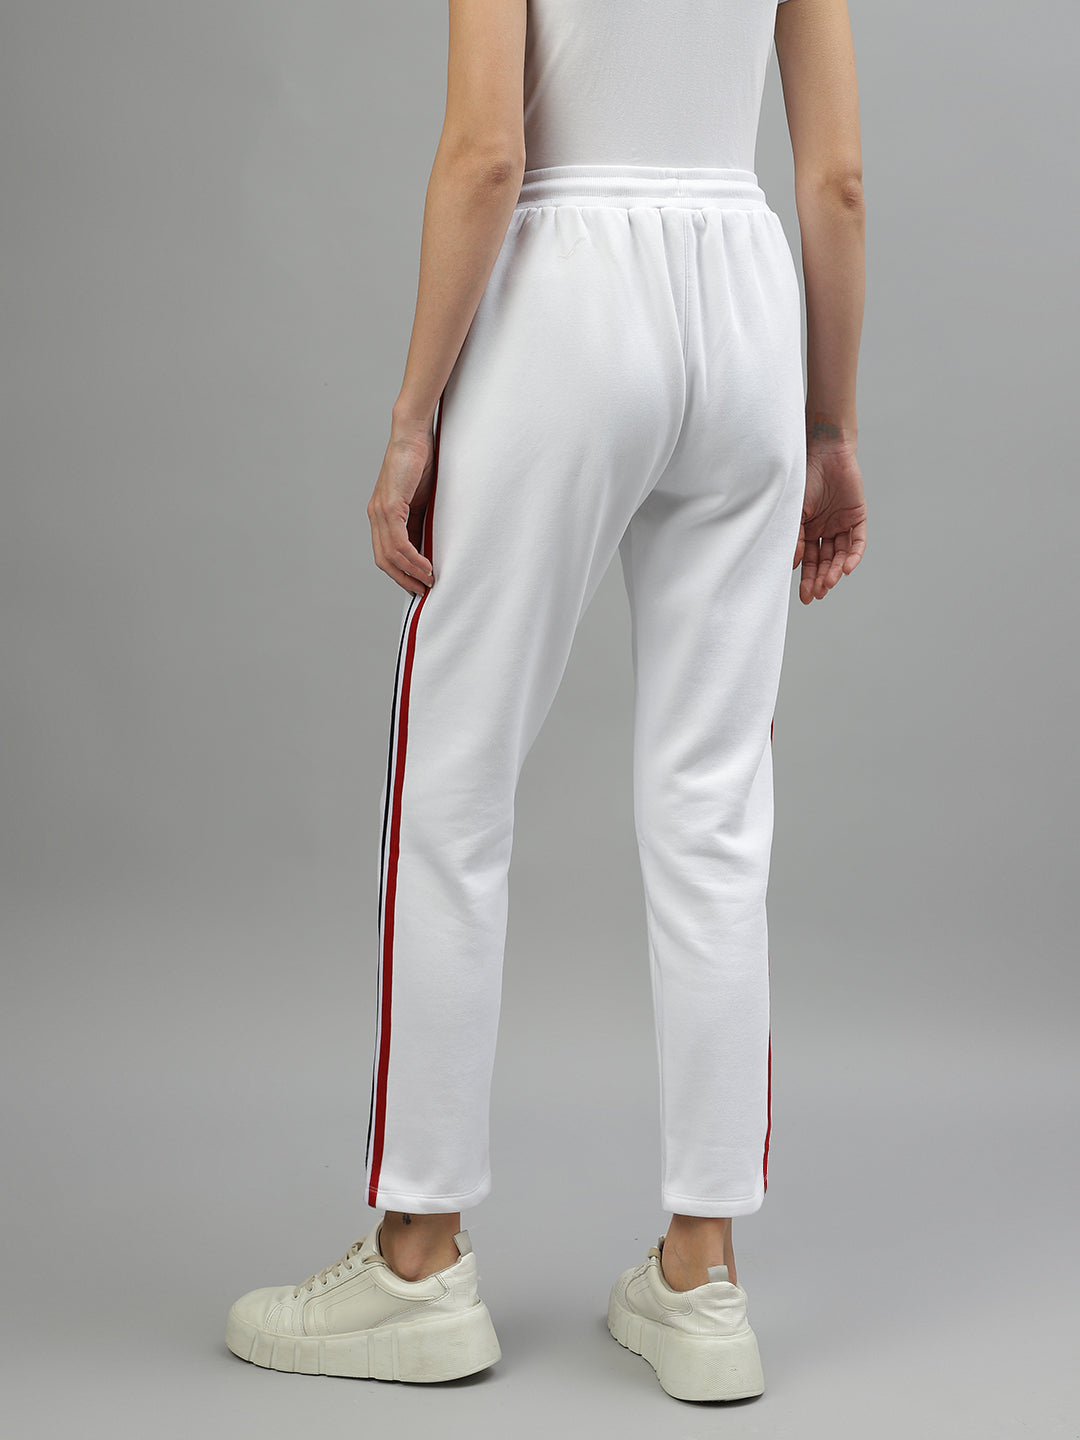 Iconic Women Solid Regular Fit Track Pants